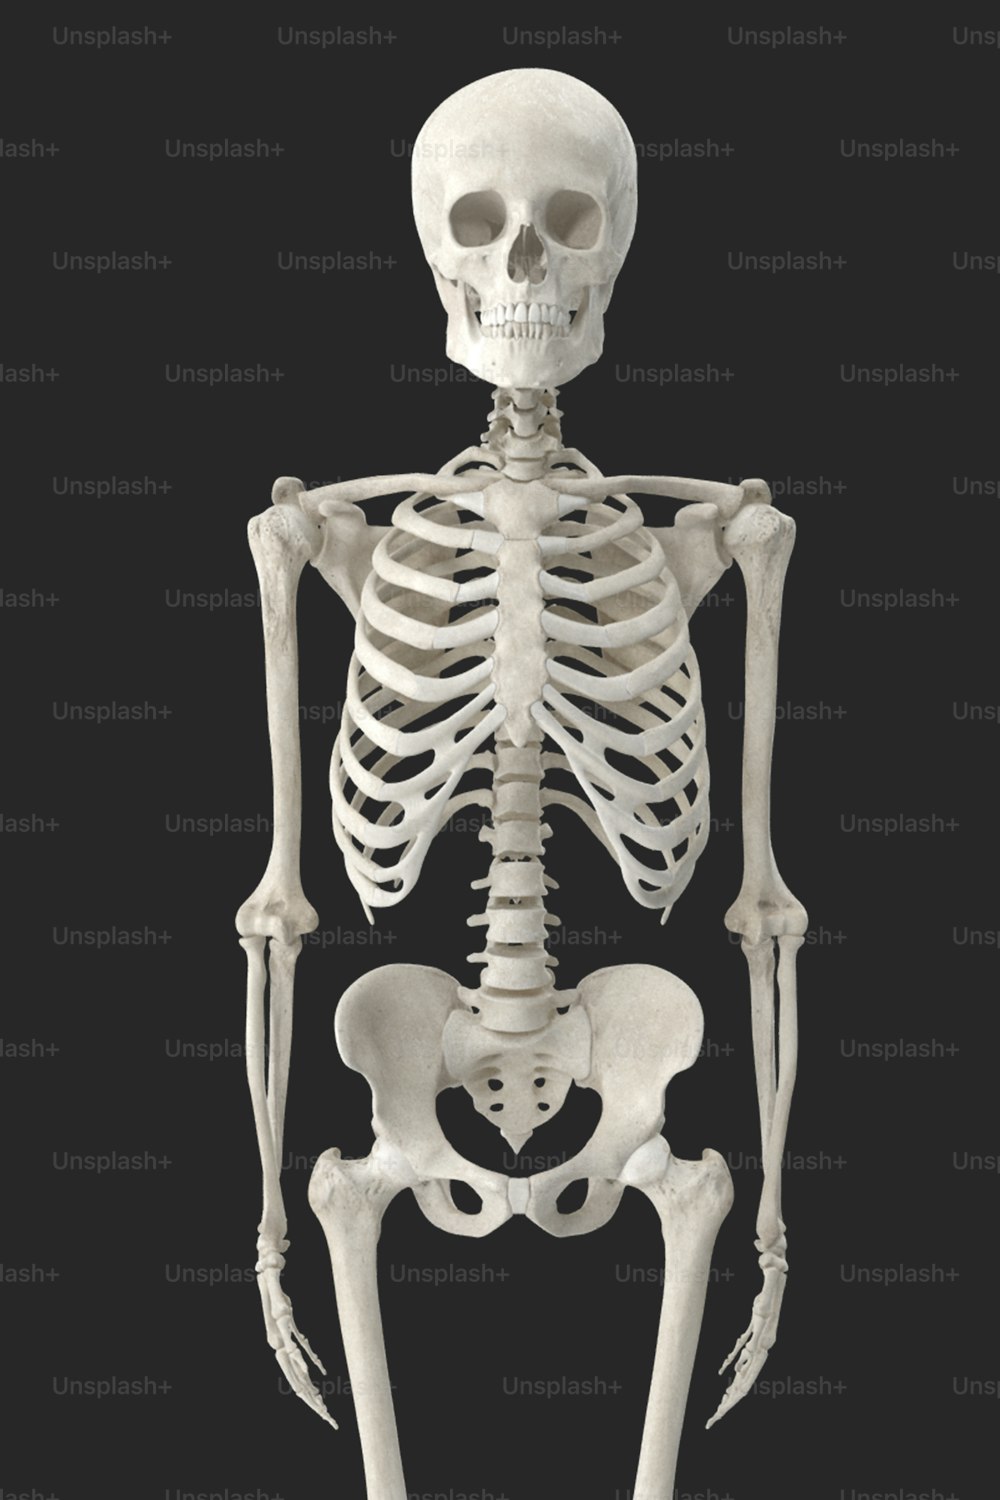 a skeleton is shown with a black background